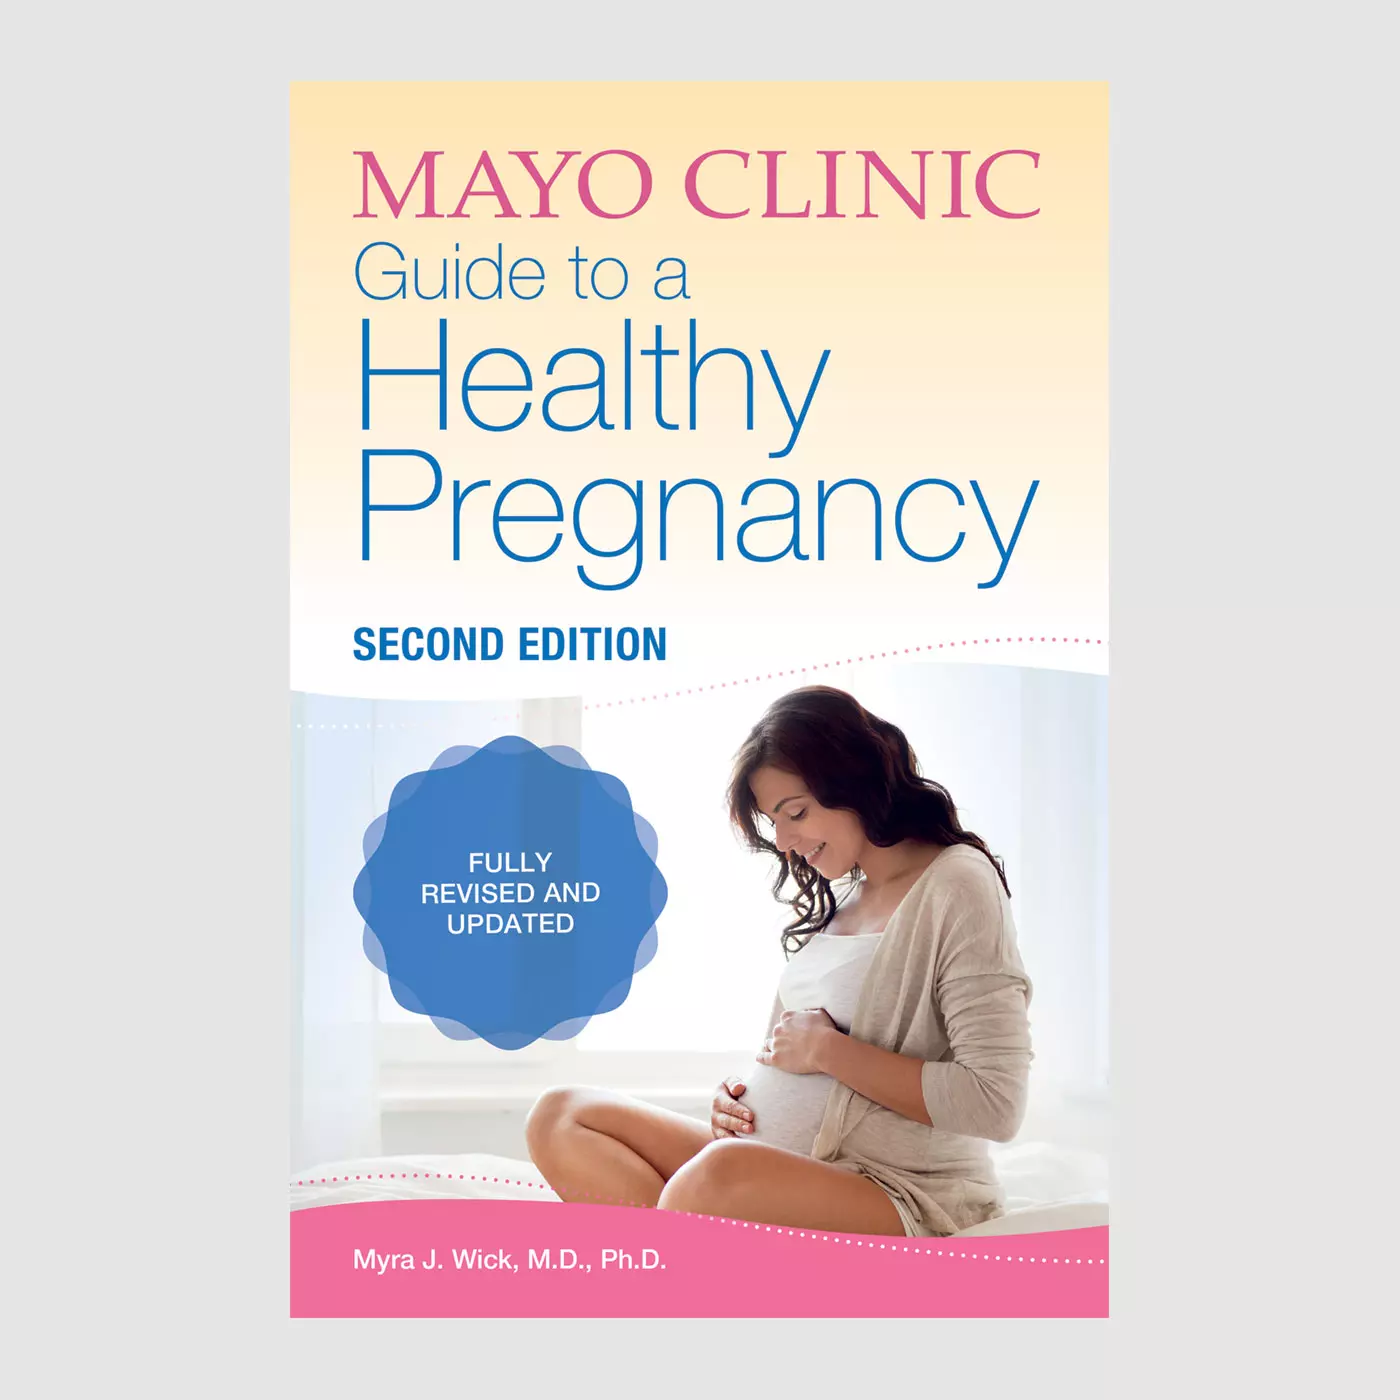 Mayo Clinic Guide to a Healthy Pregnancy 2nd Edition by Myra. J. Wick